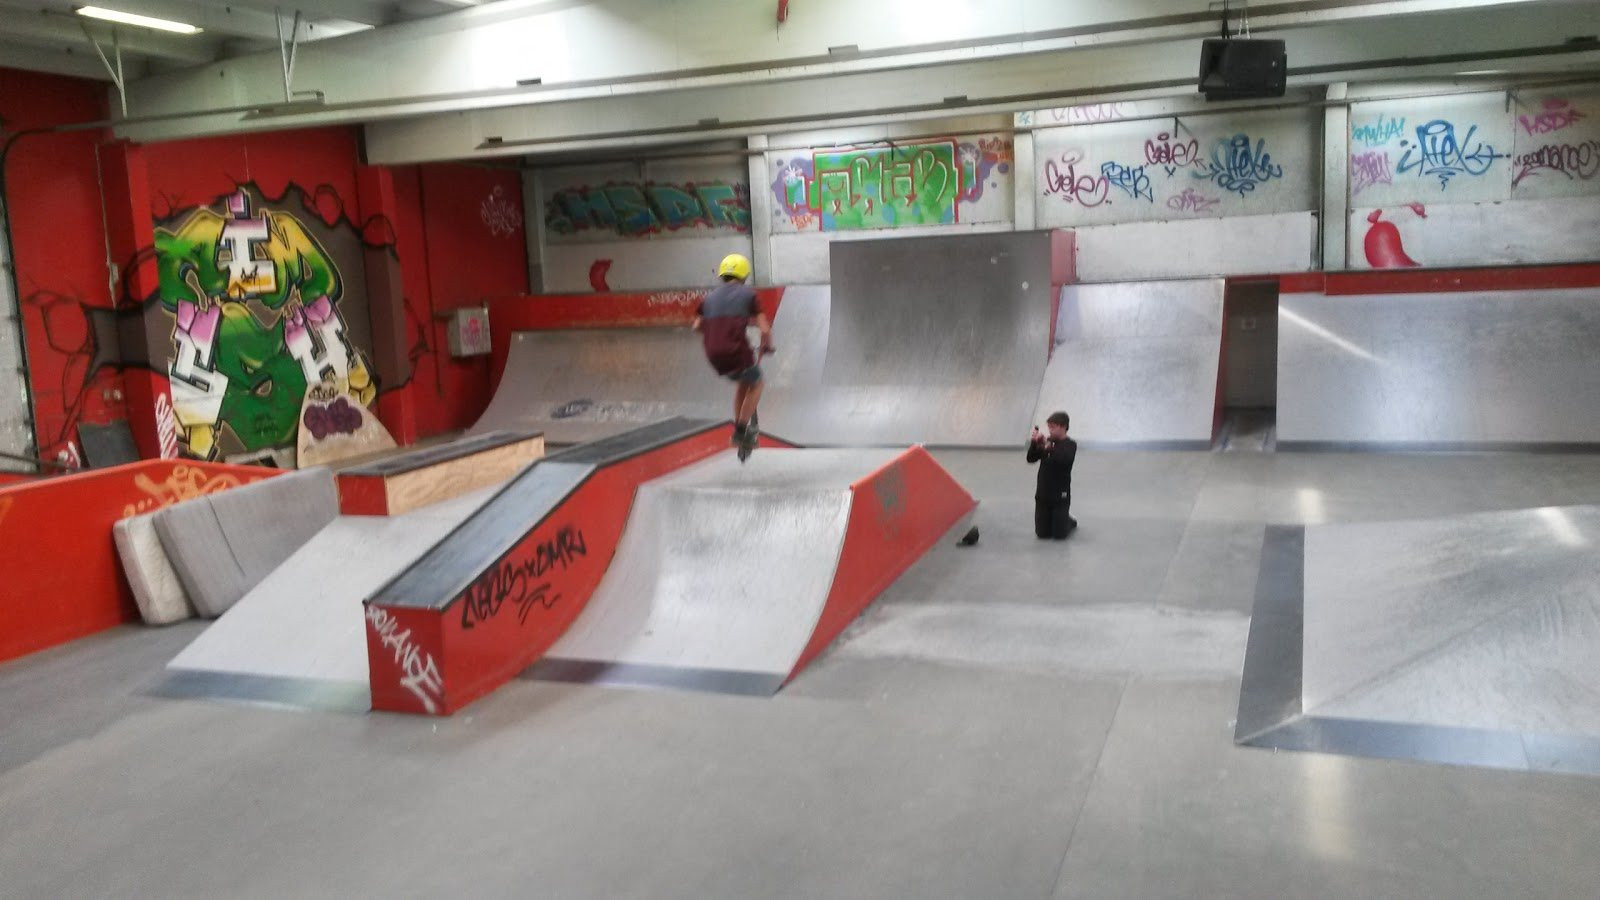 The predominant colours of this skatepark are red and grey. The indoor skatepark / skatehal, is classic and the elements are made of wood and steel. It has quarter pipes and large banks of varying sizes and levels at both ends. They help you to be creative in your lines.There are long ledges for the experienced skaters to practise the more technical grinds and there are rails, both flat bars and handrails. There is a hip and a euro gap so the opportunities to practise your spins and jumps are great. The mini vert is also made by the book. Esbjerg Skatepark is definitely worth a visit if you want to learn how to skate, to improve your skills or just enjoy a relaxed session.Esbjerg Skatepark is suitable for all skaters regardless of whether they are beginners or more experienced. The compact design where all obstacles are placed without much distance between them ensures good speed and flow. The street/vert are separated in a good way and give skaters the opportunity to be creative.Esbjerg Skatehal is administrered by esbjergrollerskate.dk. The opening hours change from week to week. You can check the opening here:https://www.google.com/calendar/embed?src=esbjergrollerskate@gmail.com&amp;ctz=Europe/CopenhagenIt is possible to buy a yearly membership for 500 DKK and a daily admission ticket for 50 DKK.